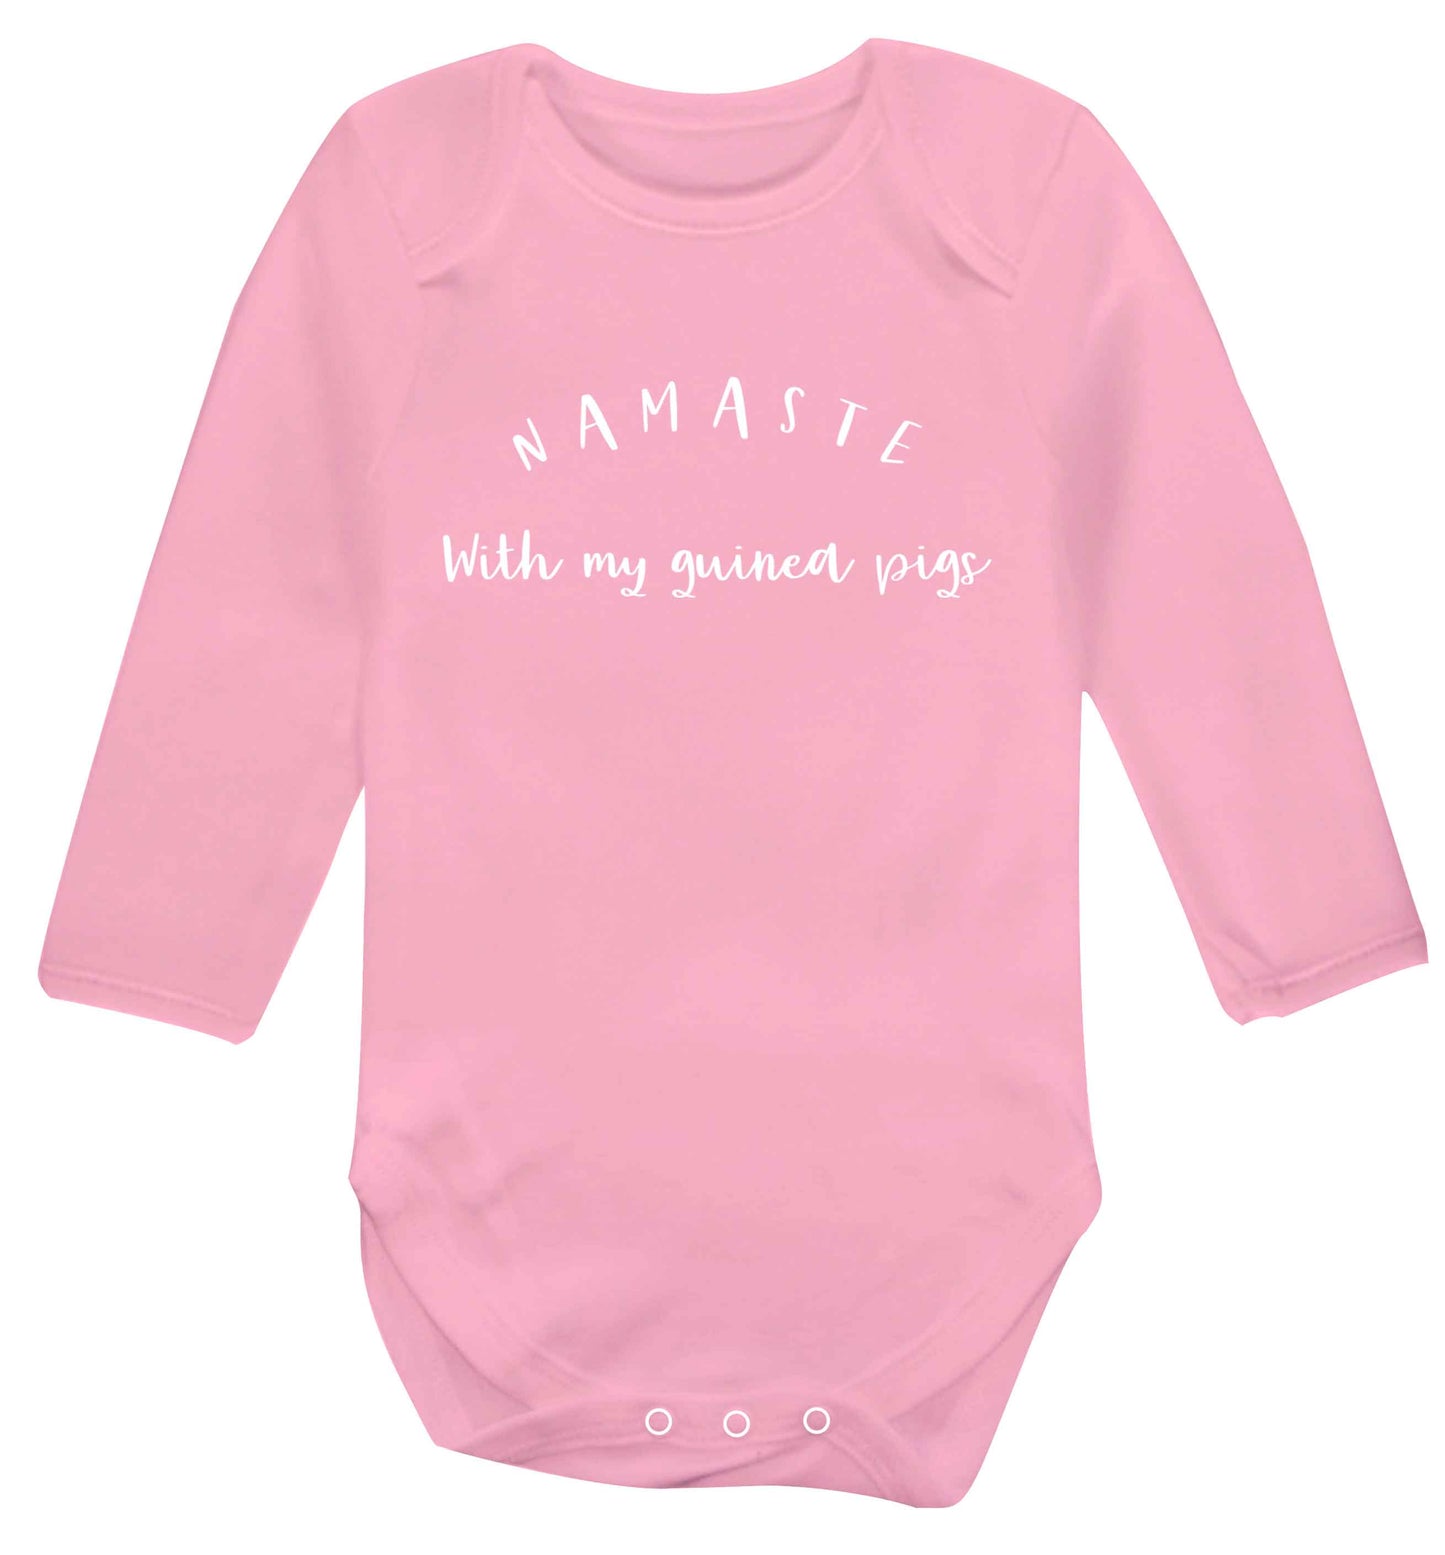 Namaste with my guinea pigs Baby Vest long sleeved pale pink 6-12 months